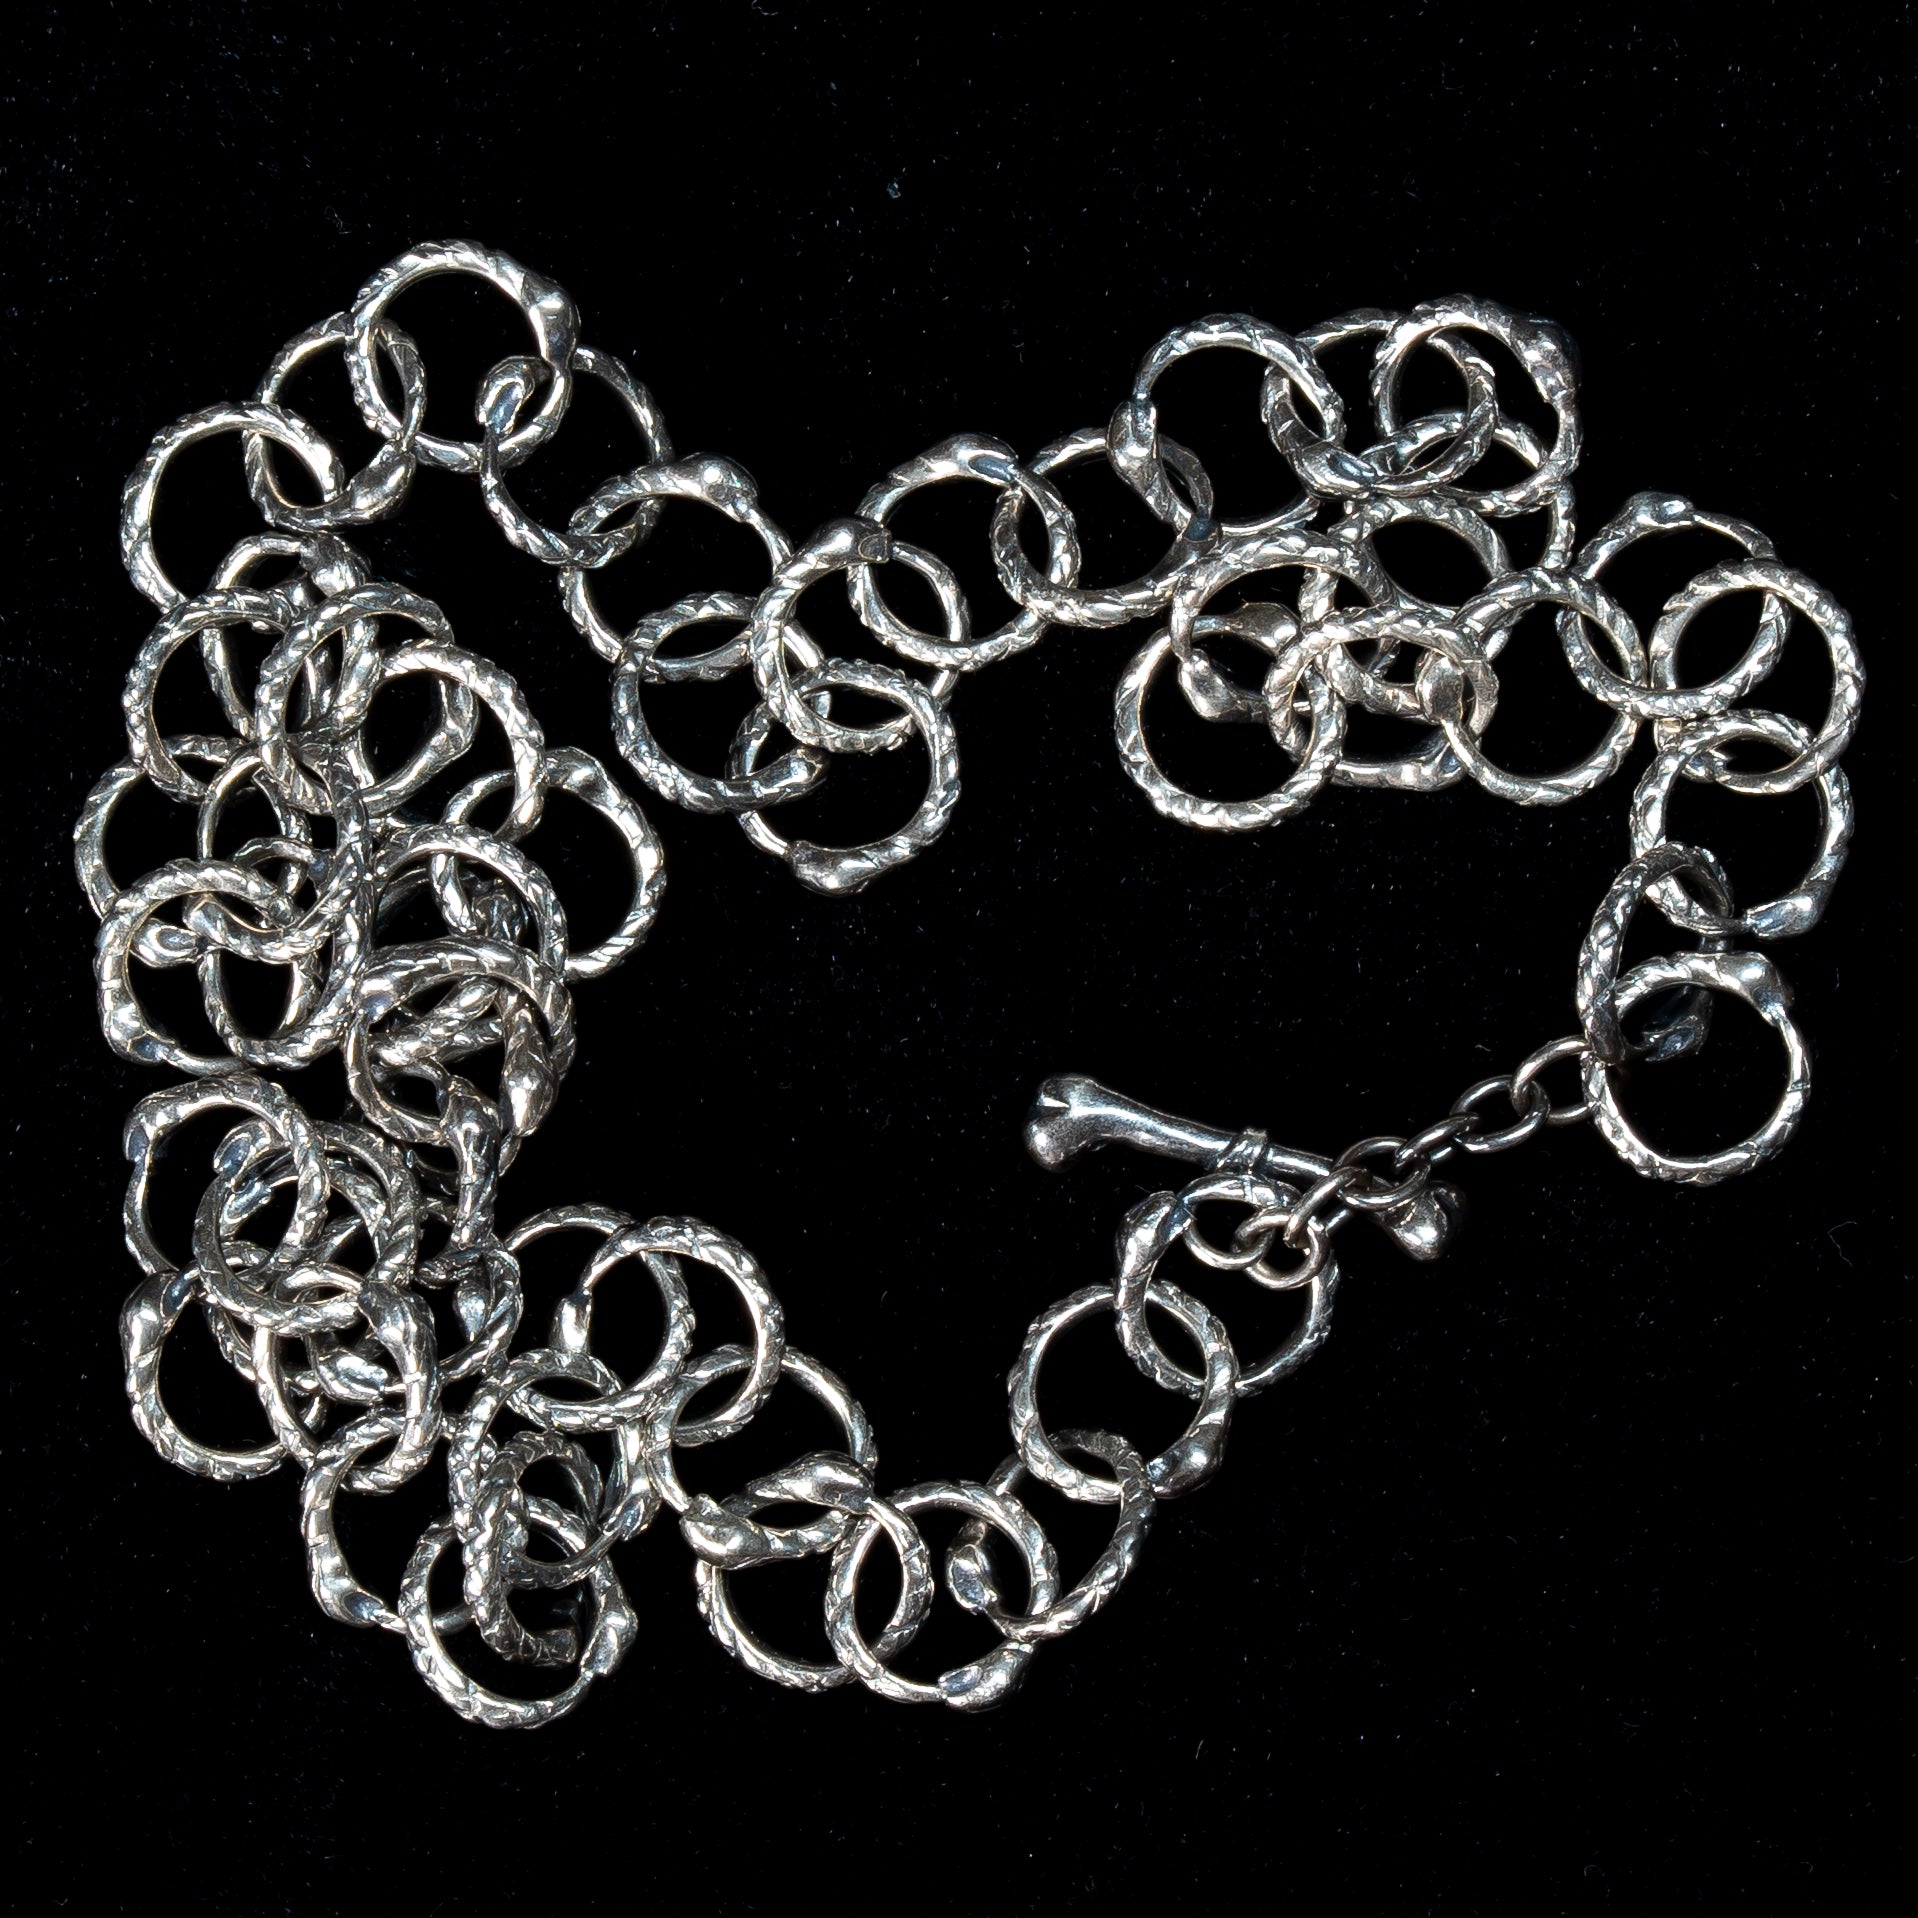 handmade baby snake  chain link necklace in sterling silver on a black background